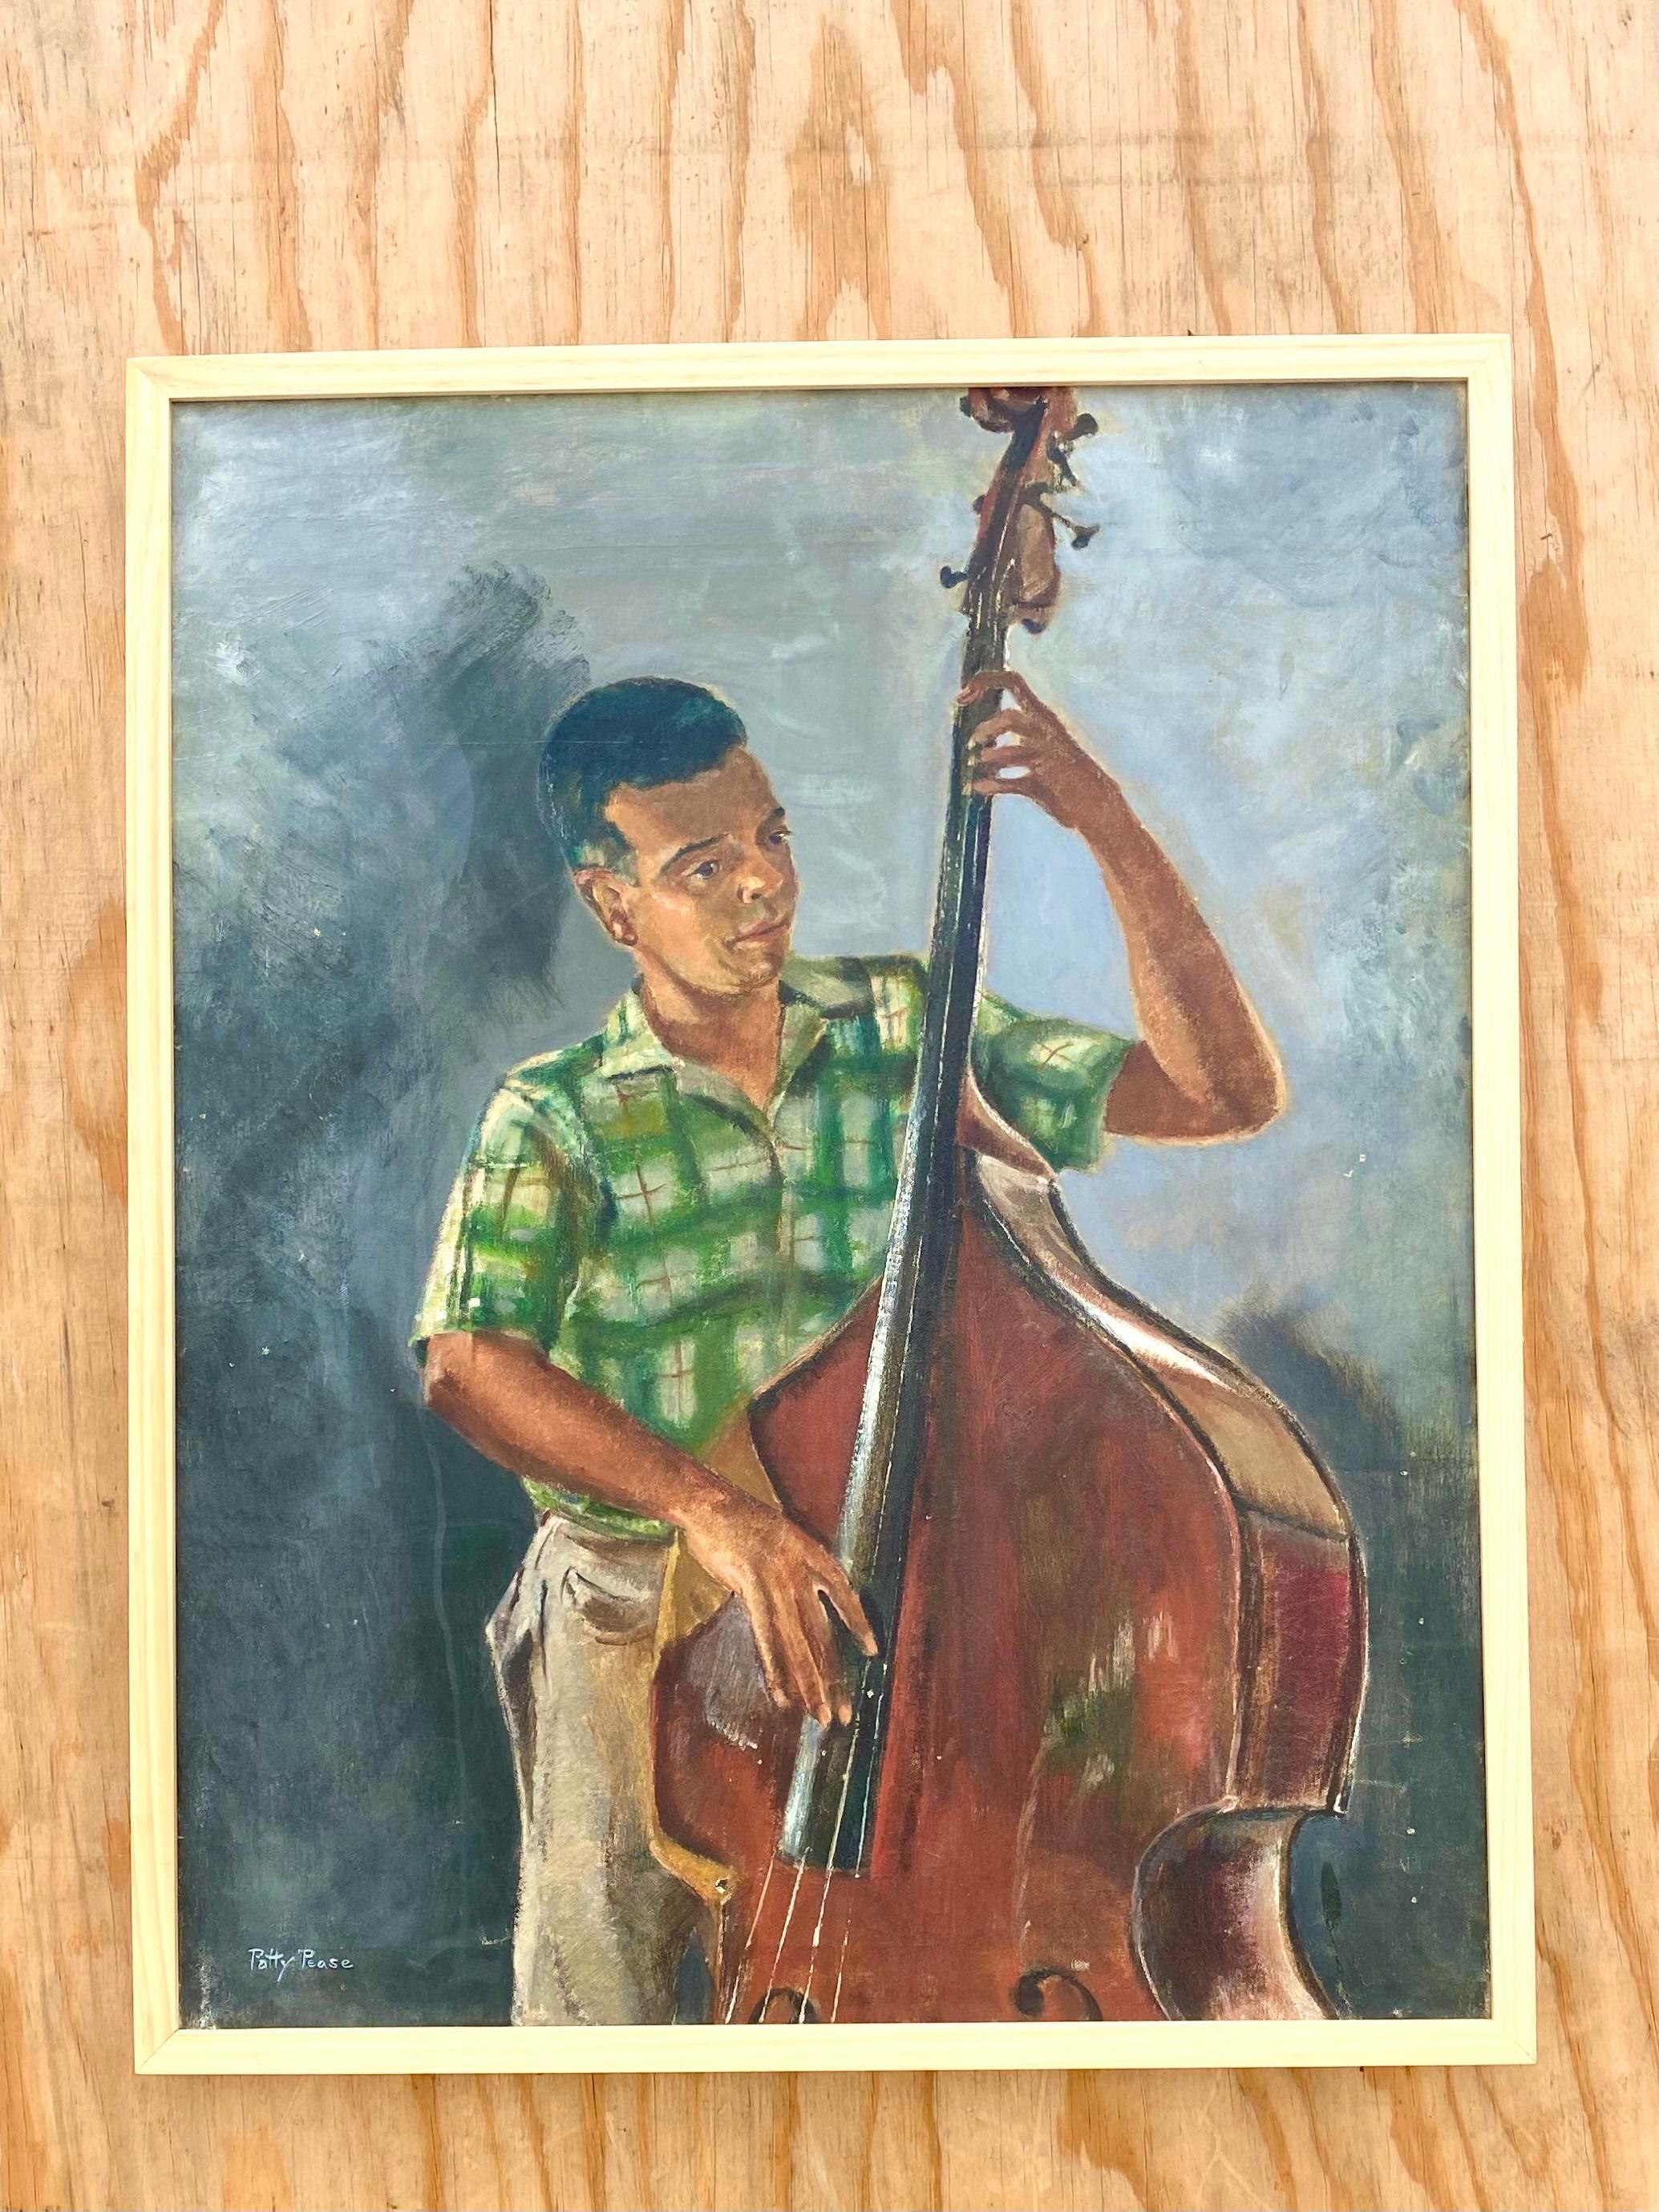 Fantastic vintage original oil painting. Signed by the artist Patty Pease. A fabulous composition of a MCM bass player.